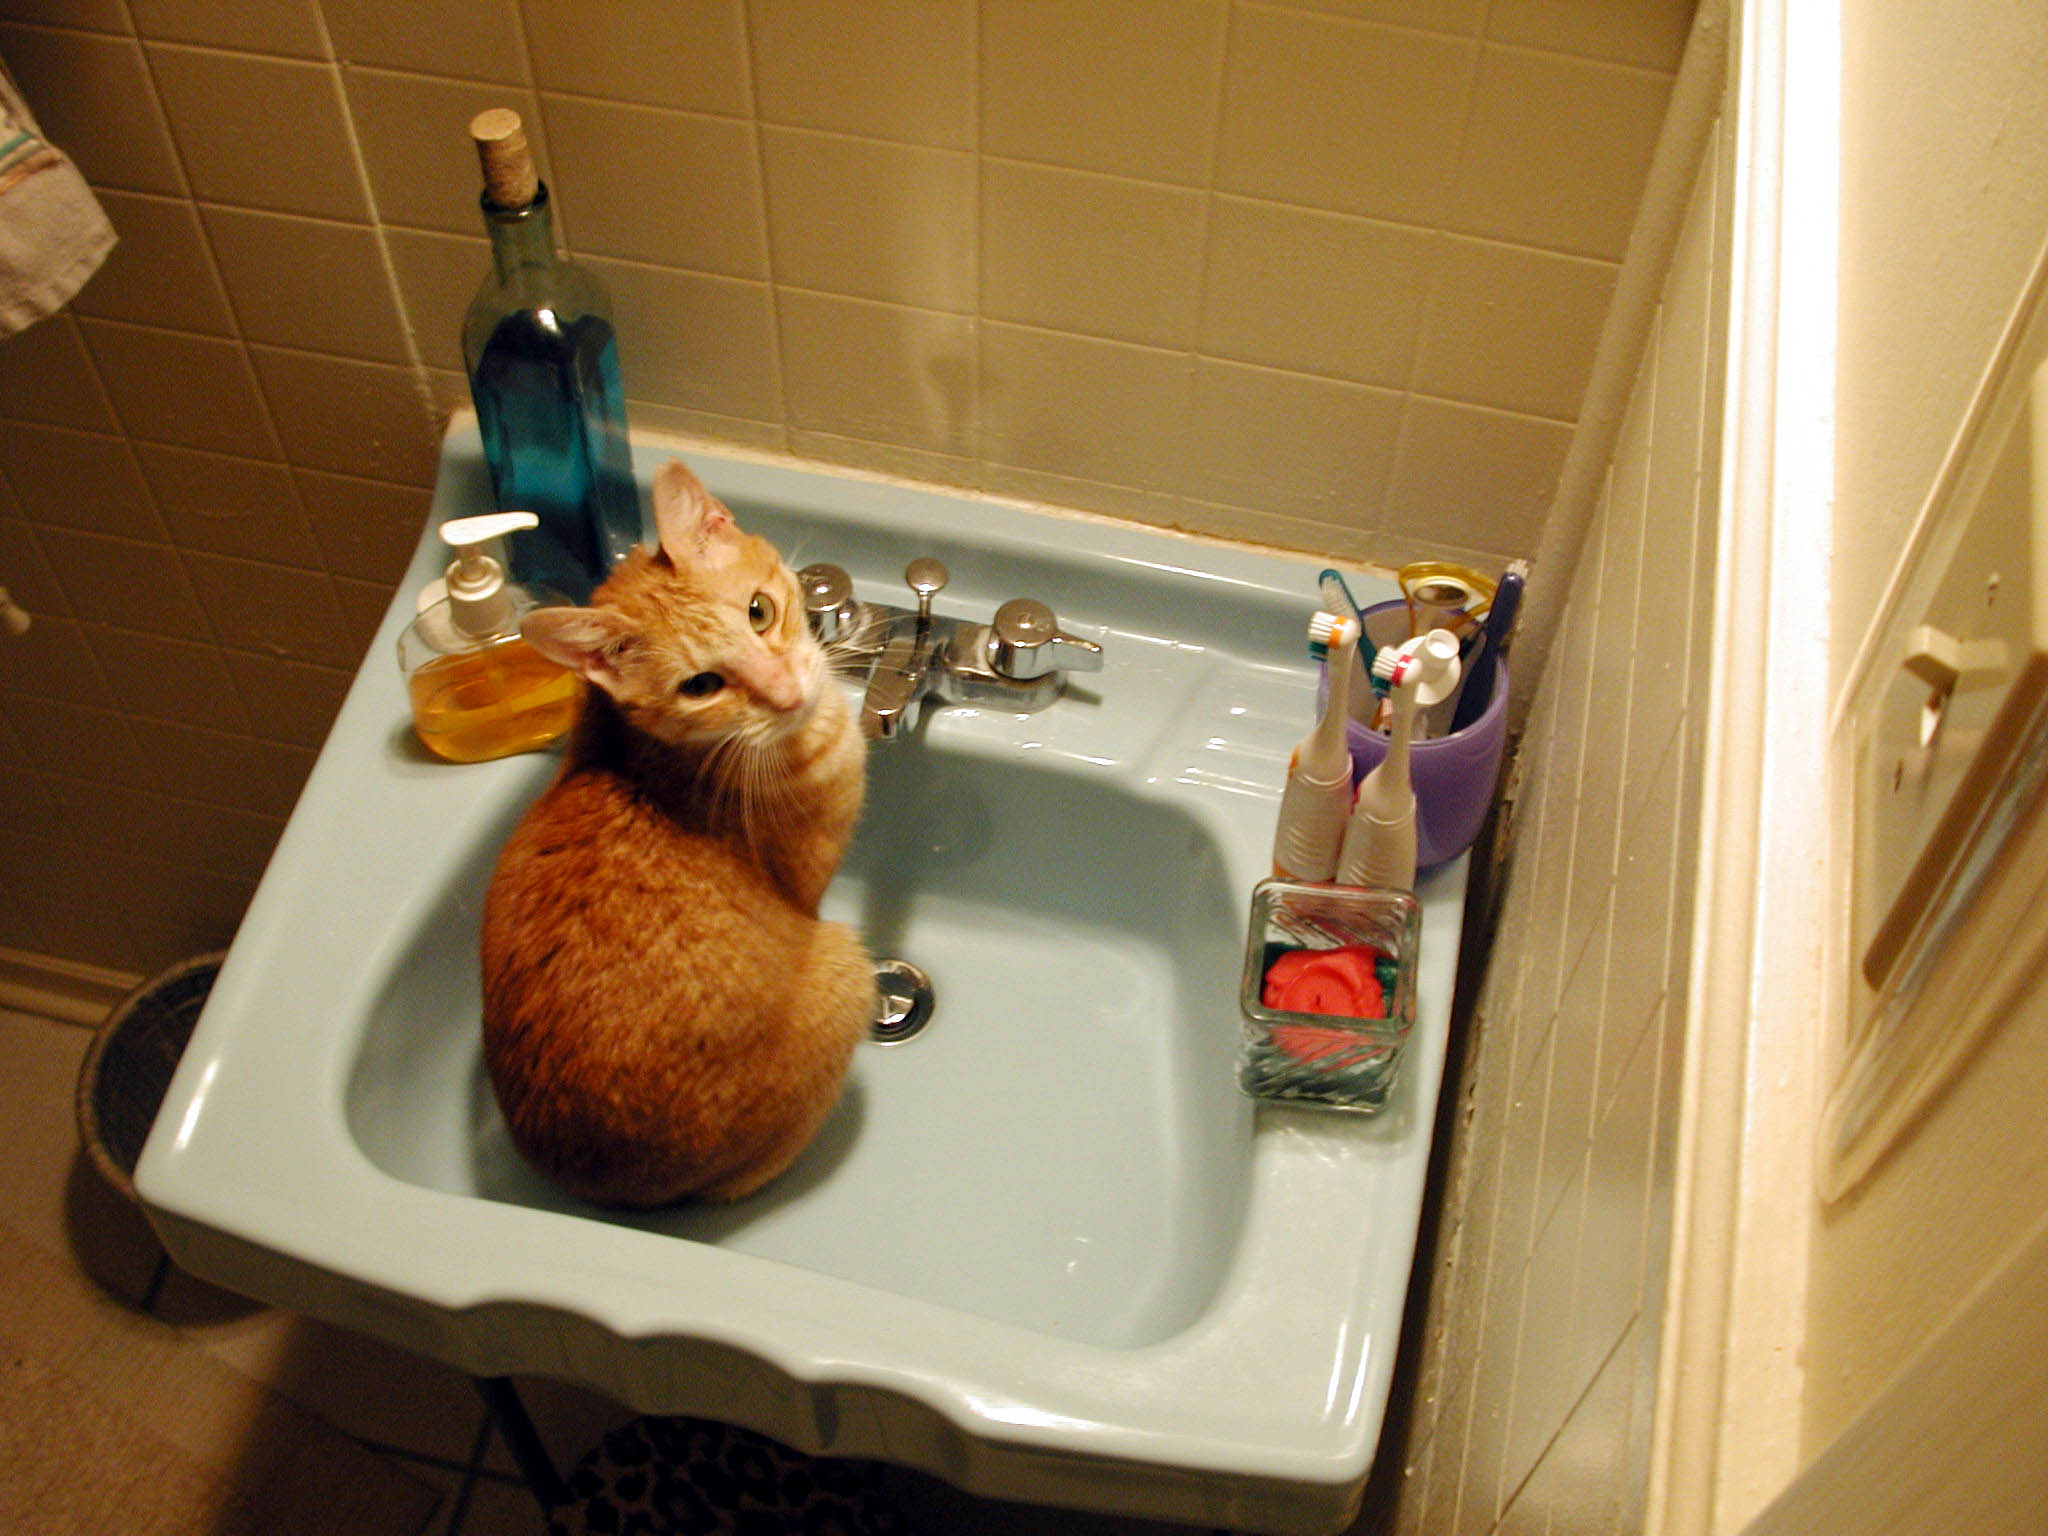 the cat is sitting in the bathroom sink